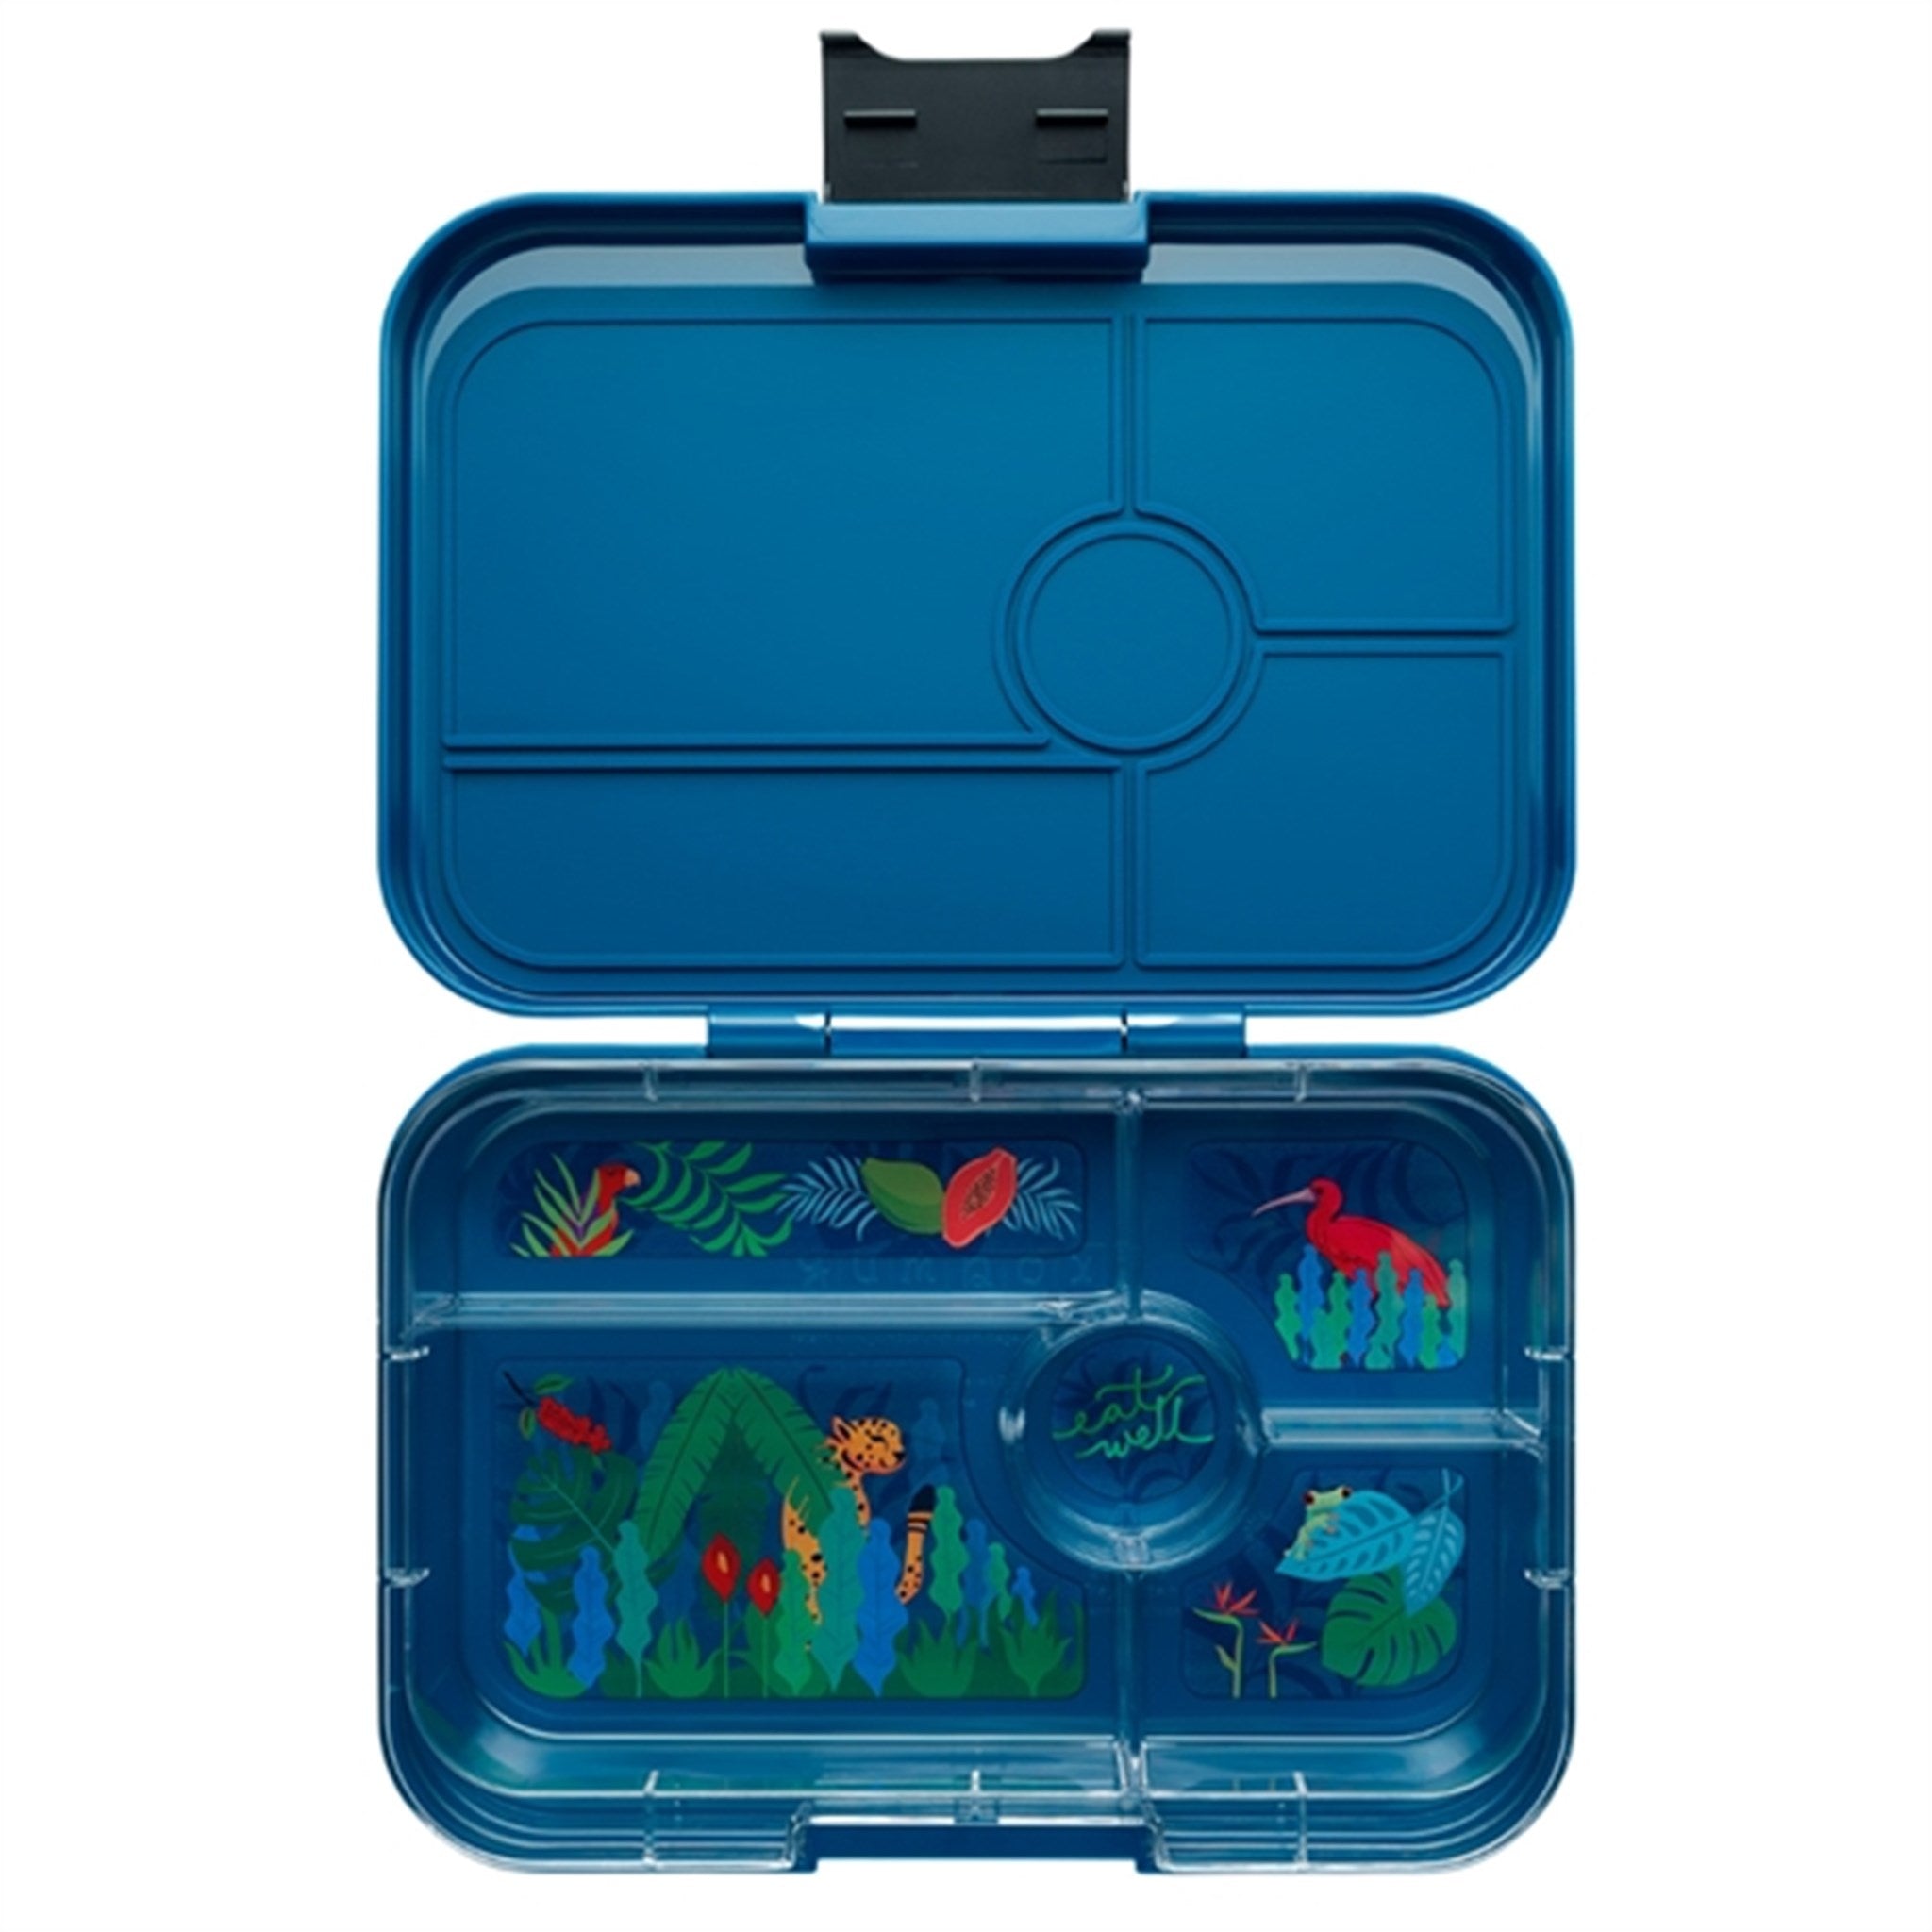 Yumbox Tapas XL 5 Sections Lunch Box Monte Carlo Blue/Jungle